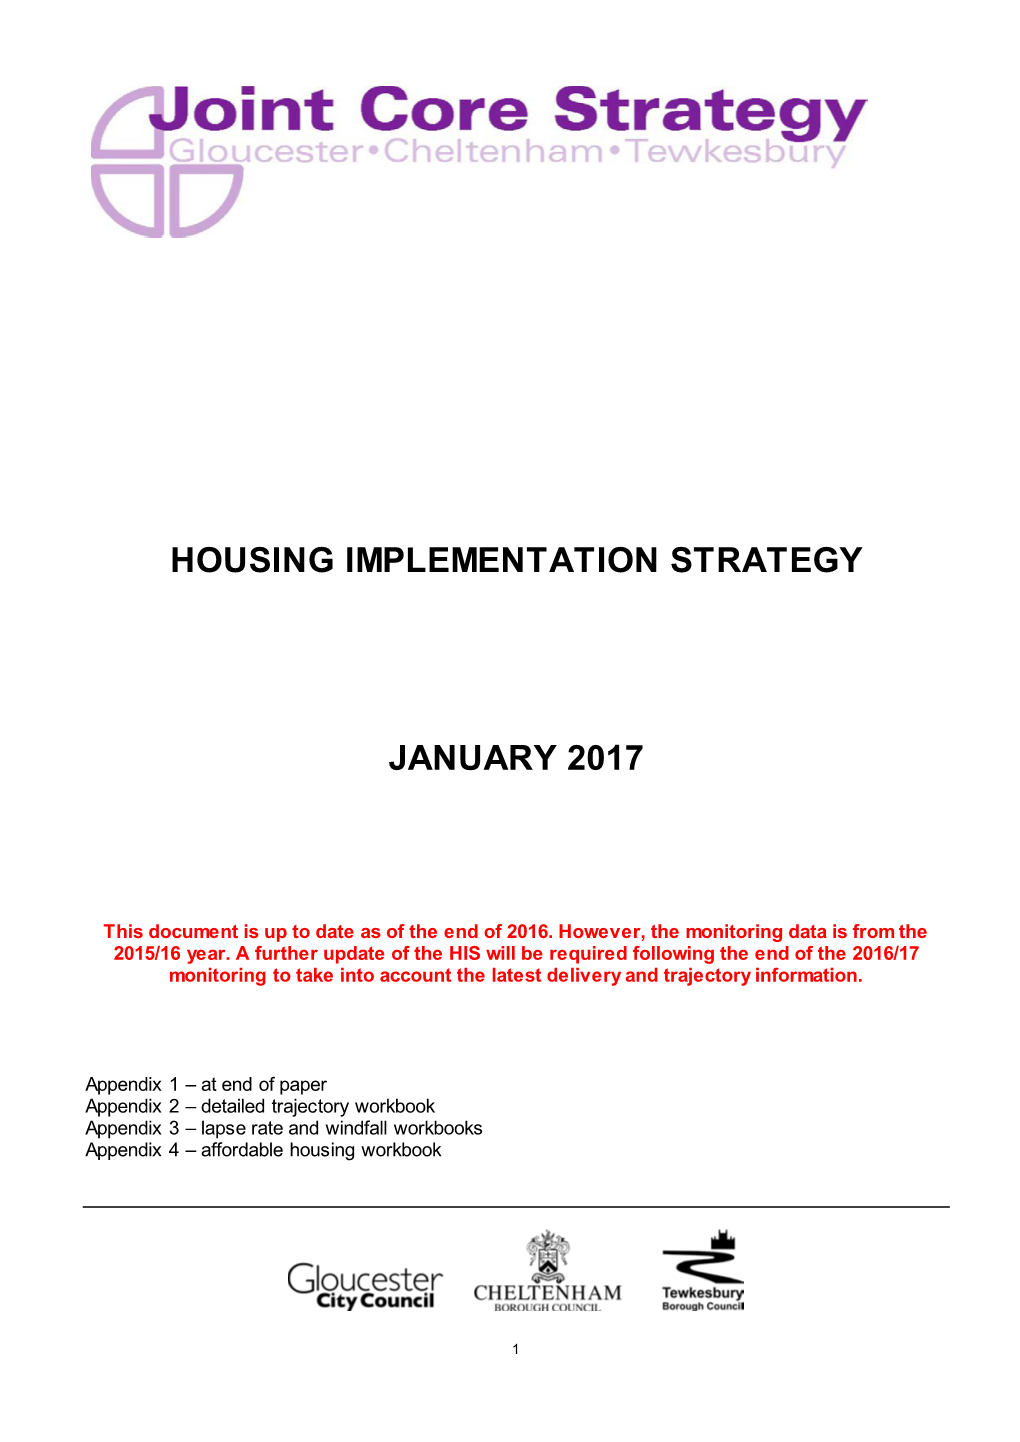 Housing Implementation Strategy January 2017